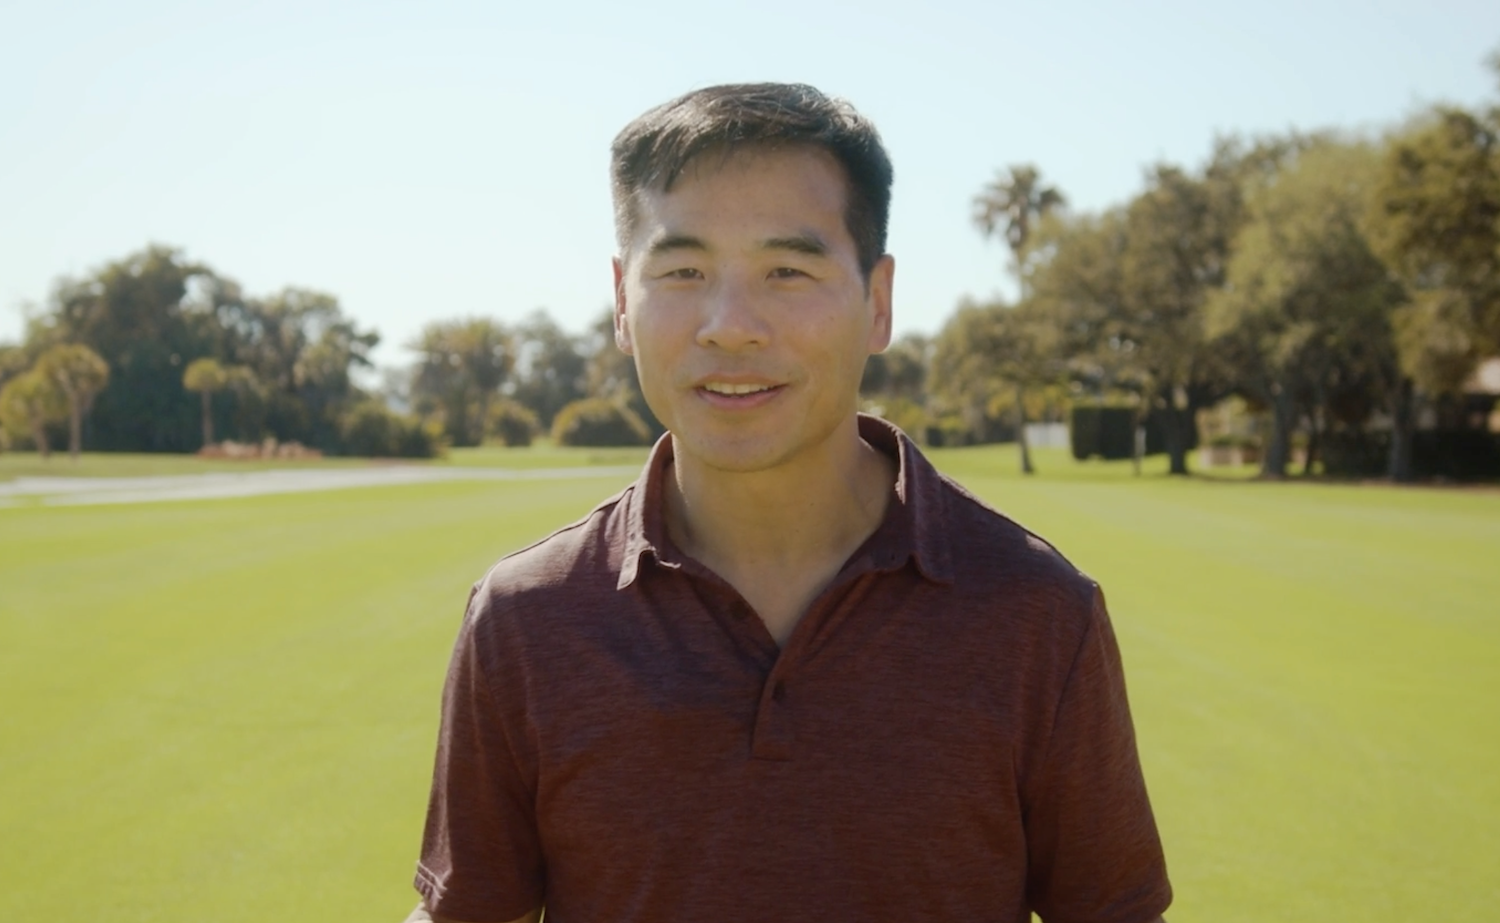 Sparrow Golf CEO Joe Chin is pictured on a golf course.